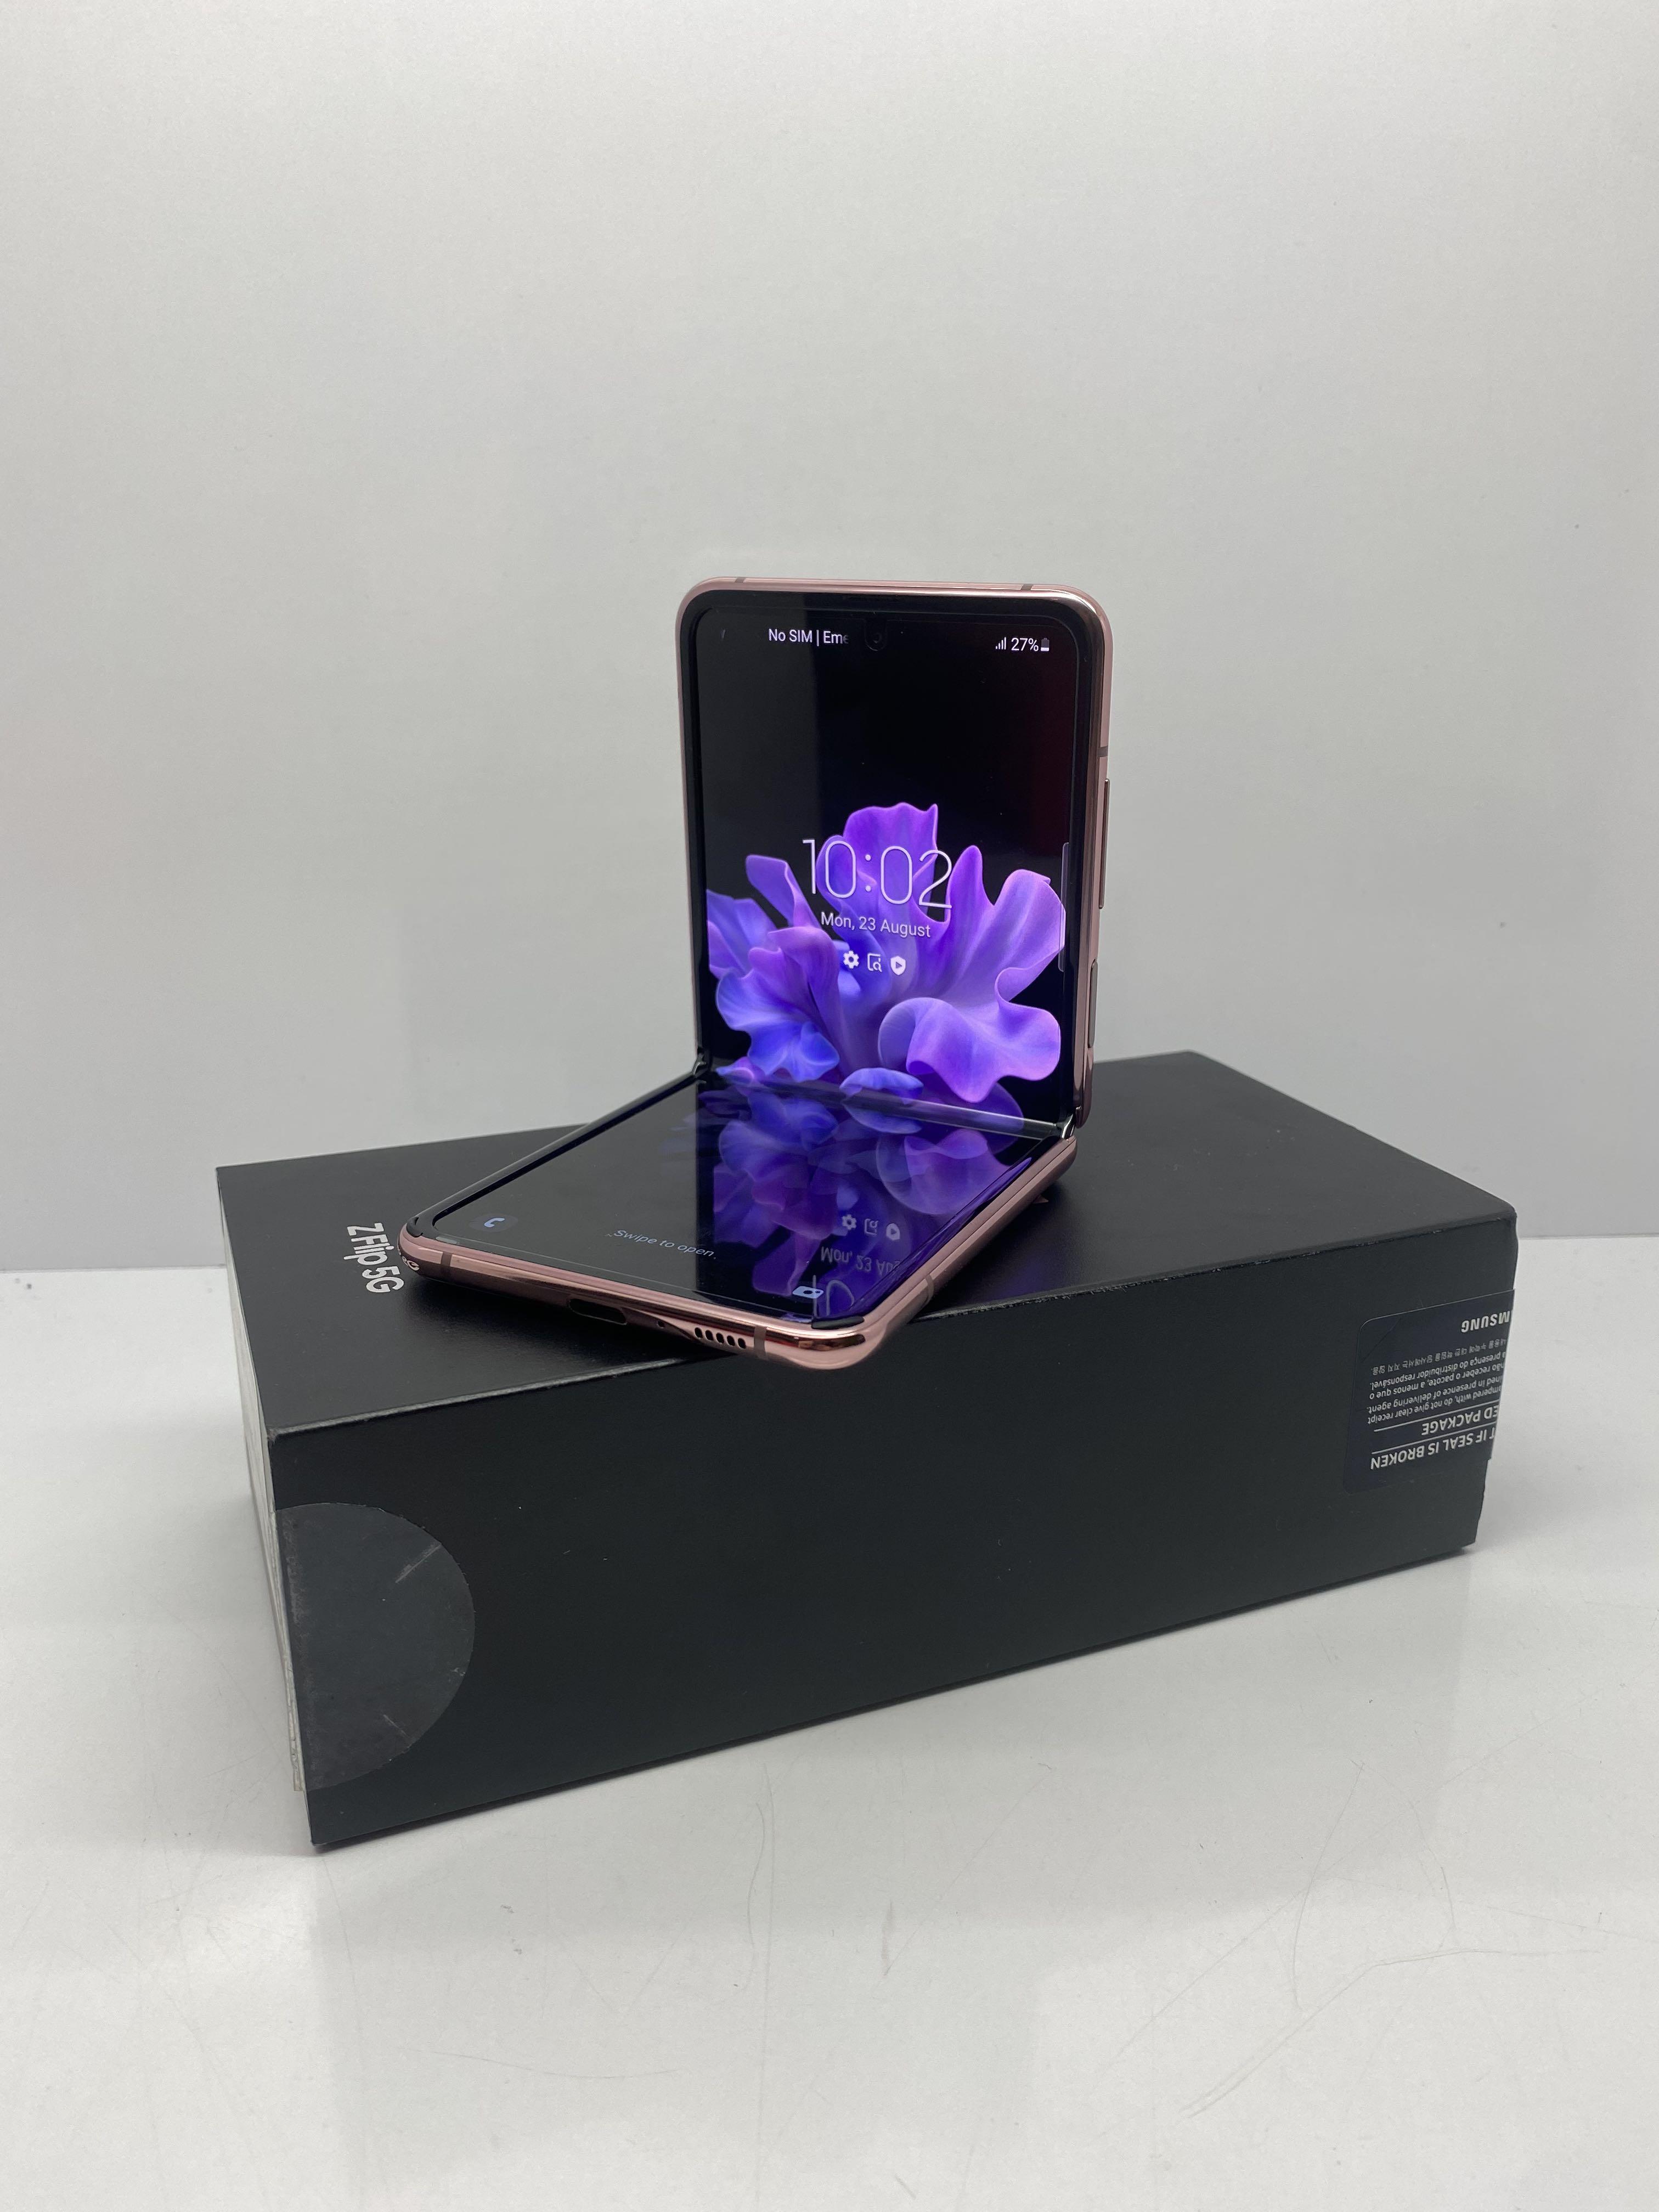 Galaxy Z Flip 5g Mystic Bronze Mobile Phones Gadgets Mobile Phones Android Phones Samsung On Carousell